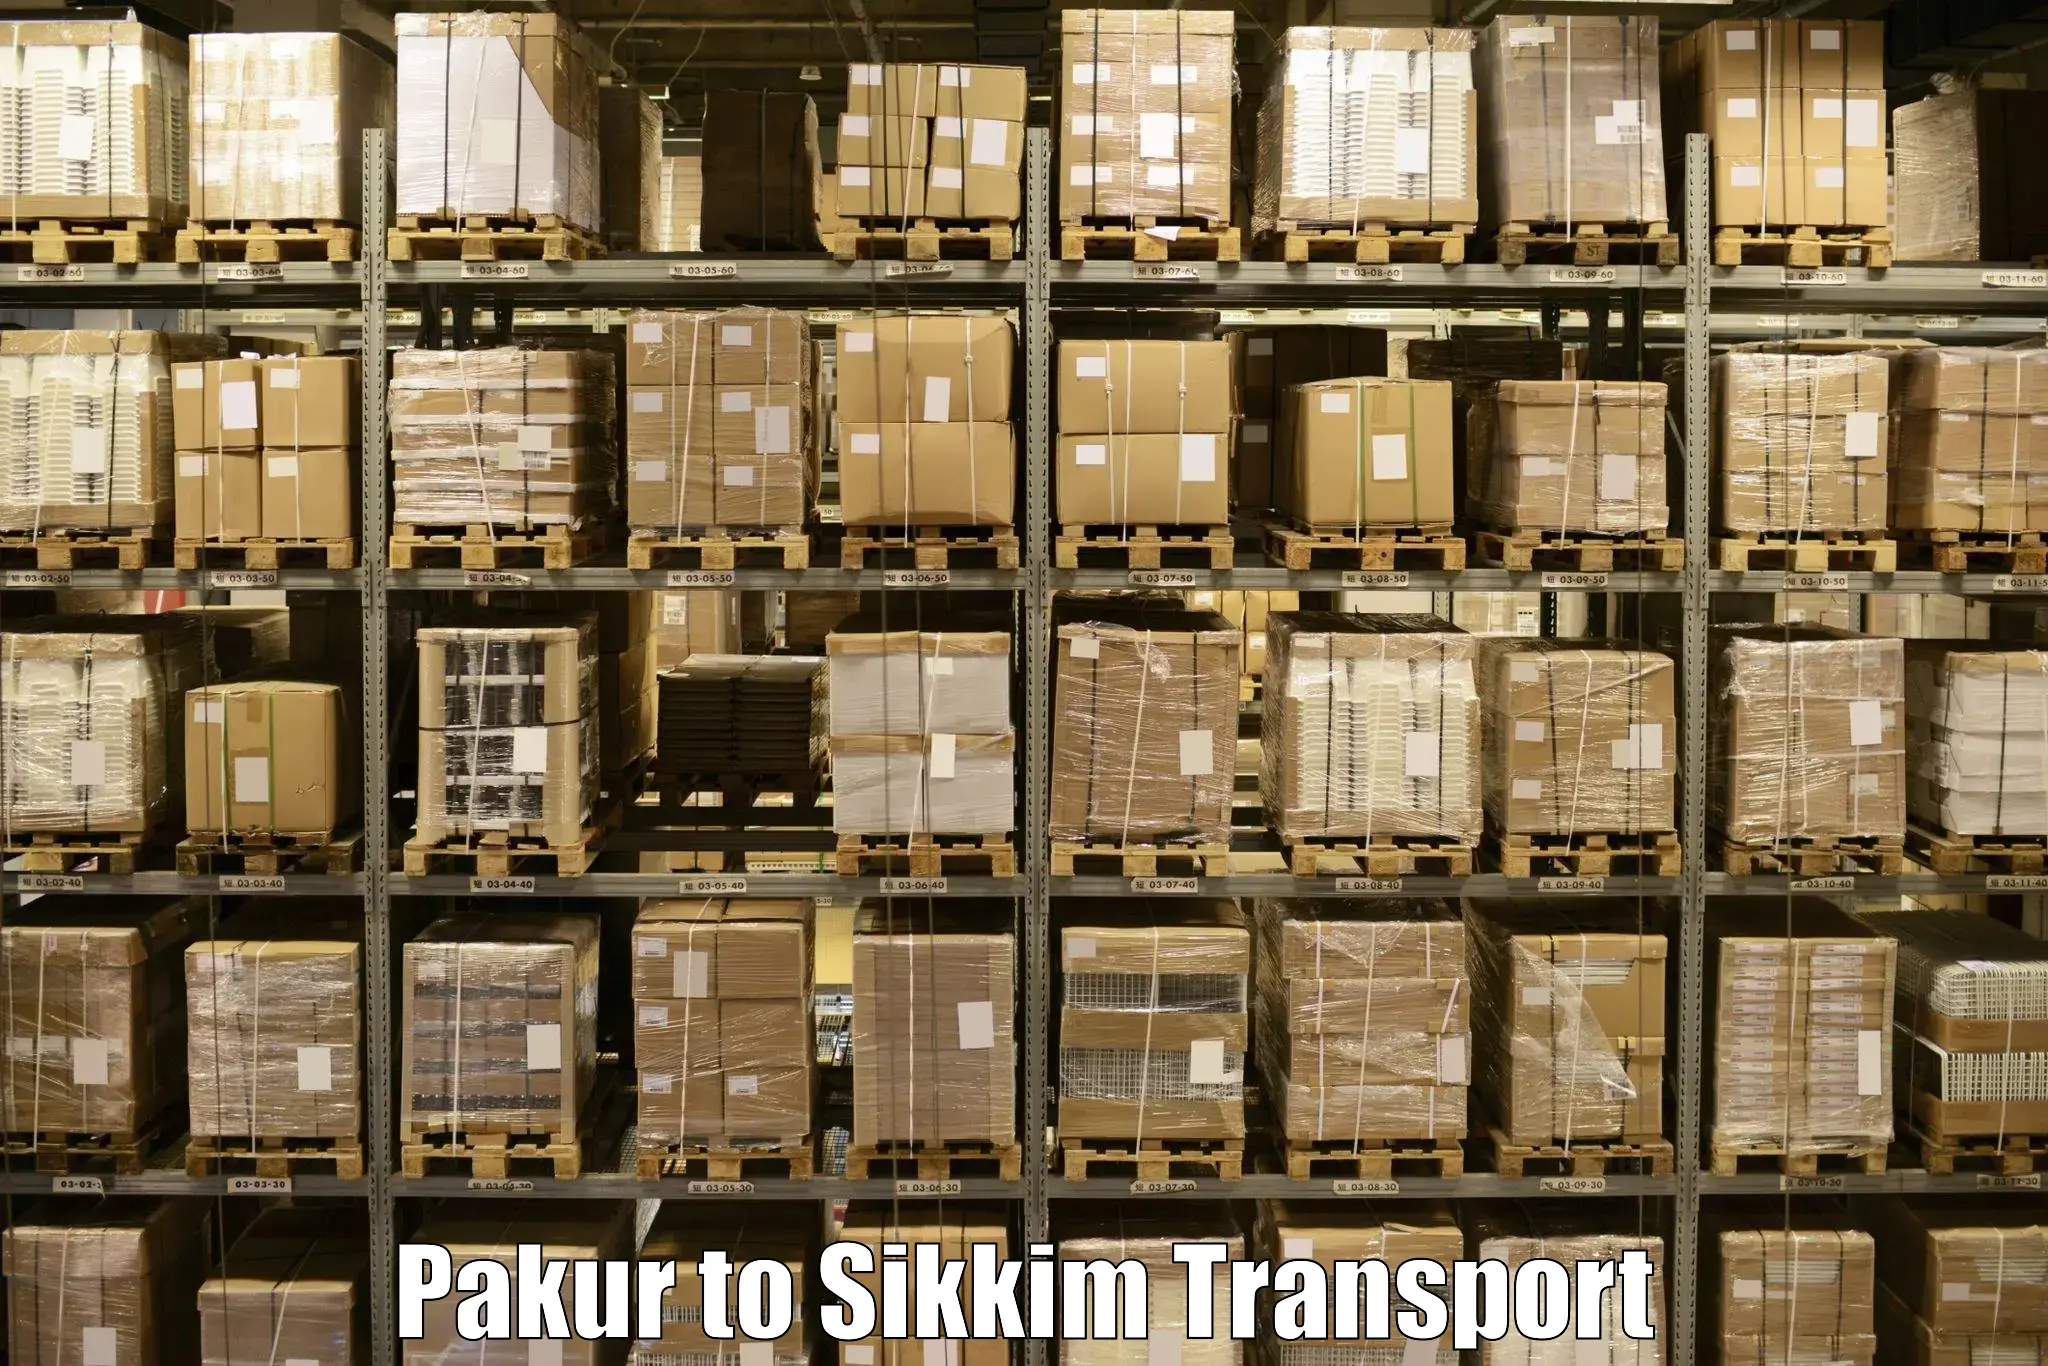 Daily transport service Pakur to Sikkim